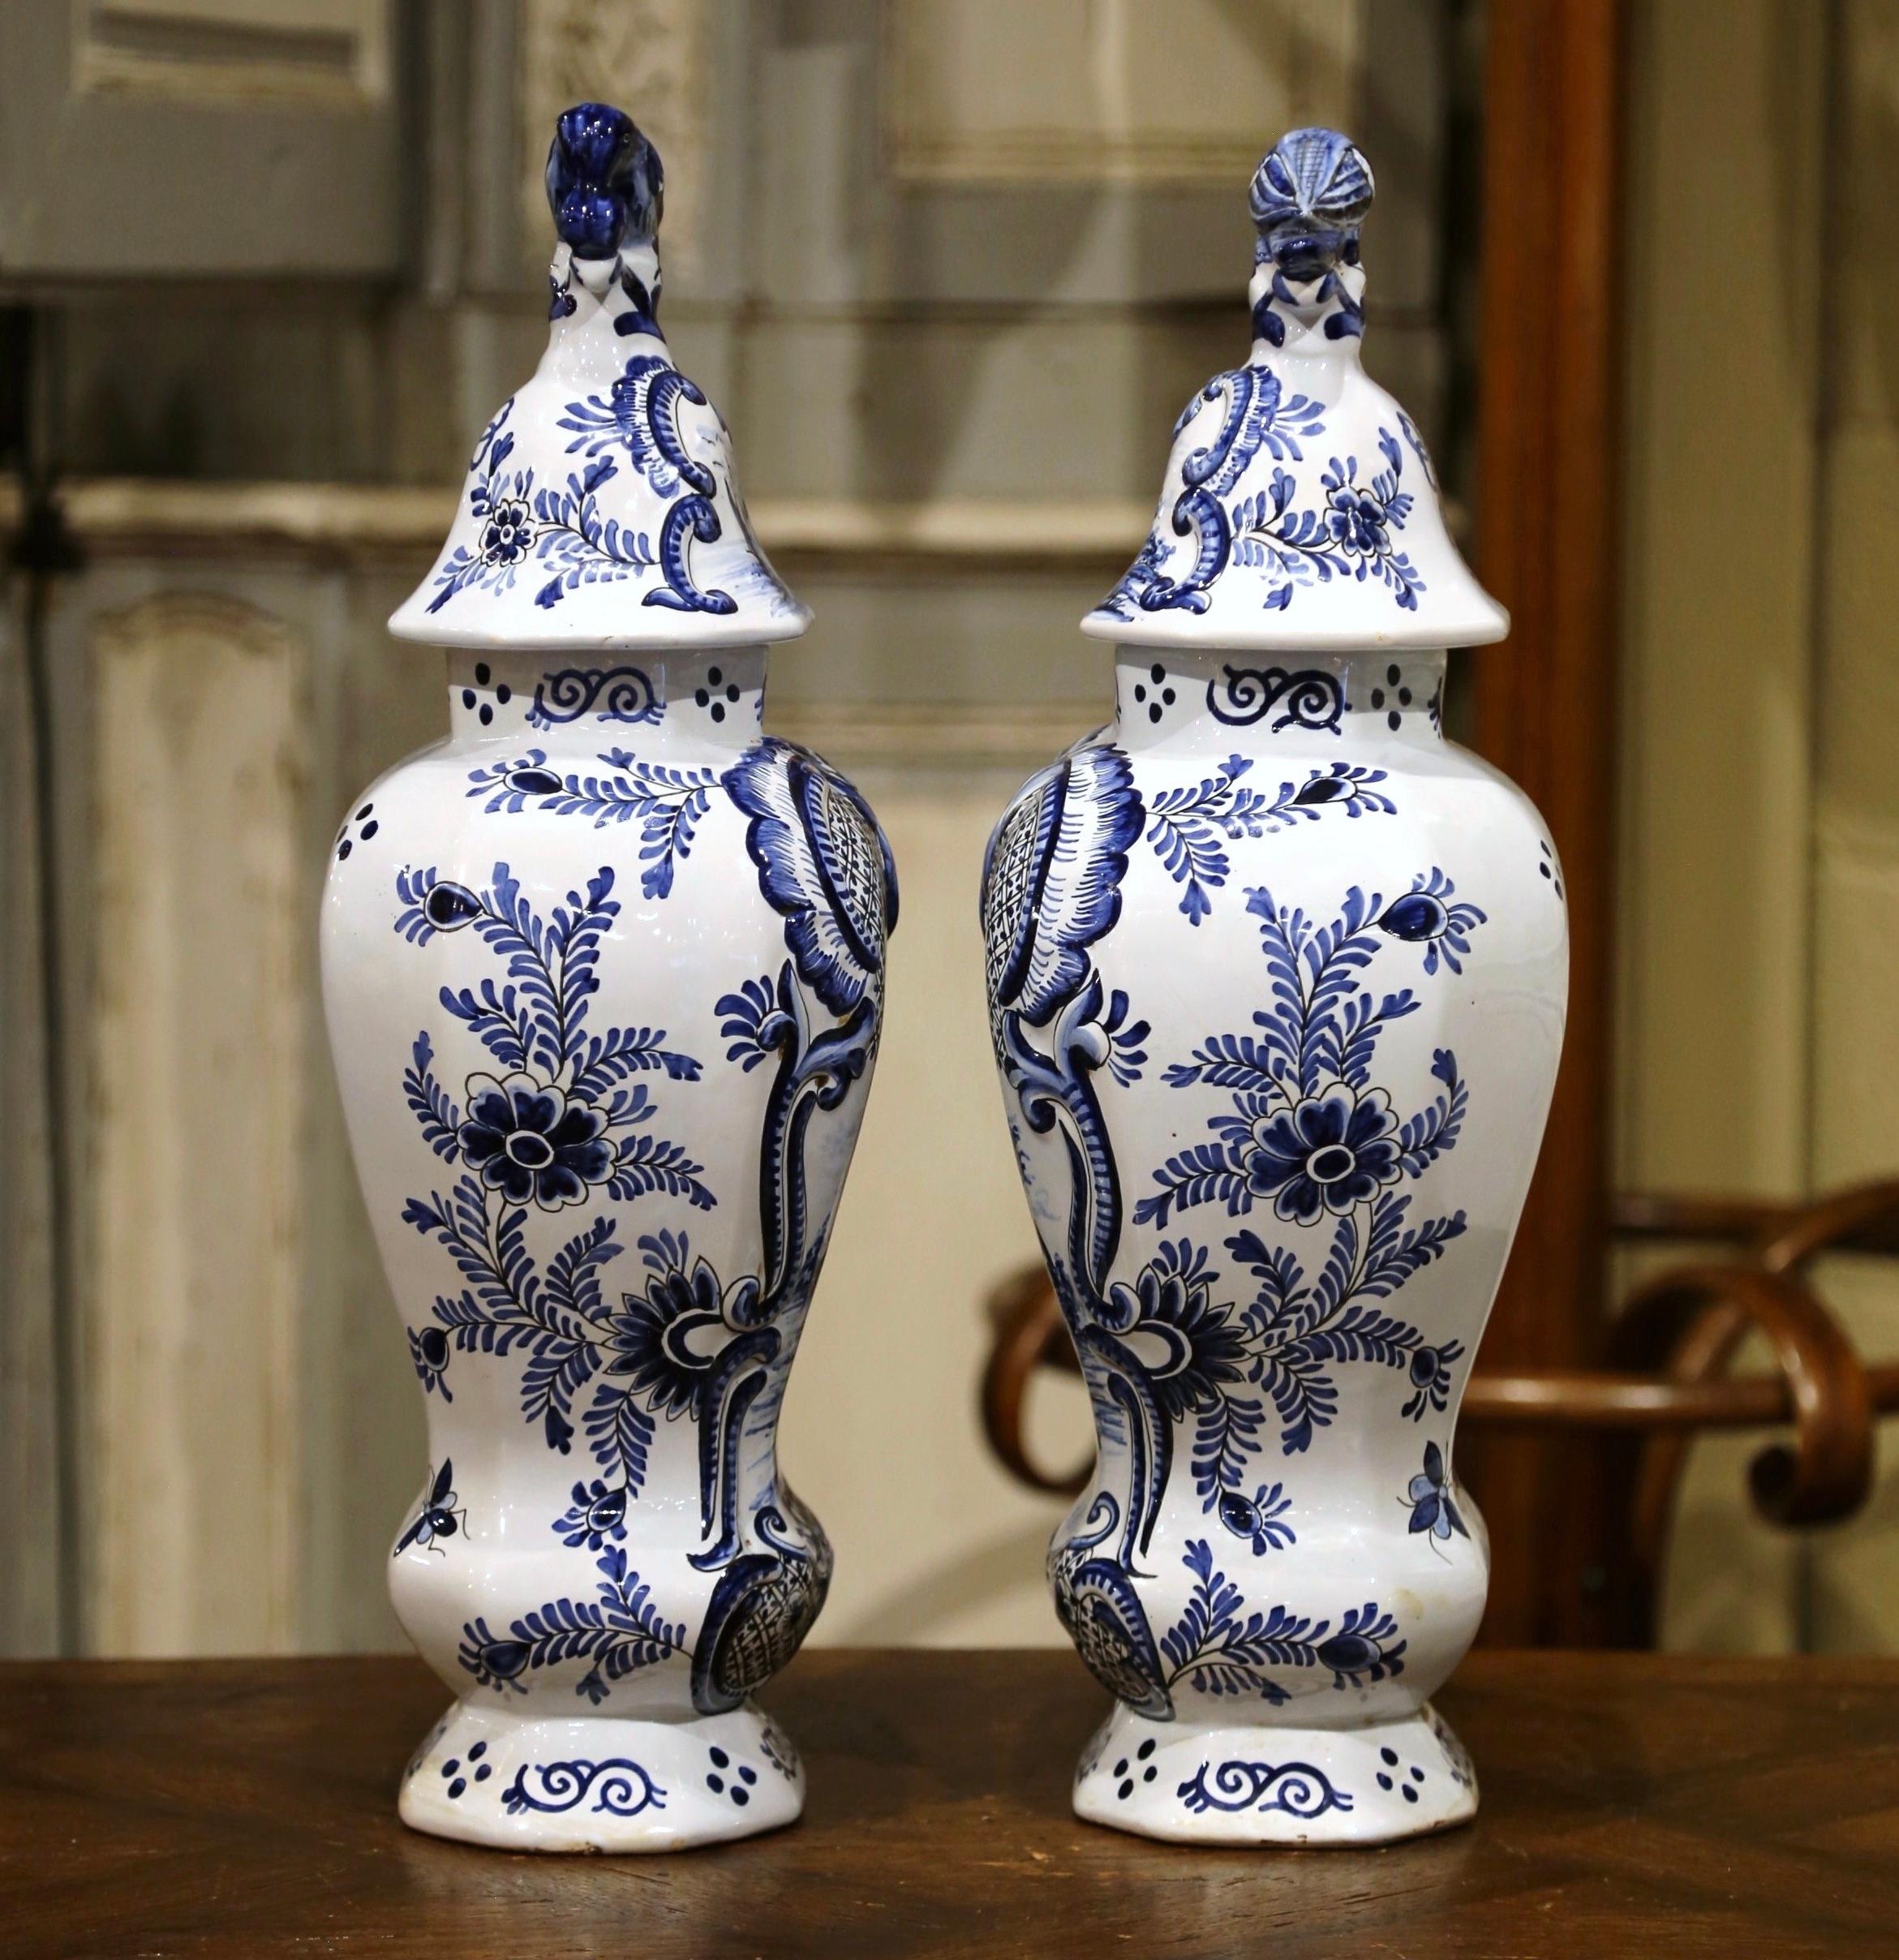 Pair of Mid-19th Century French Blue and White Faience Delft Vases with Lids 1